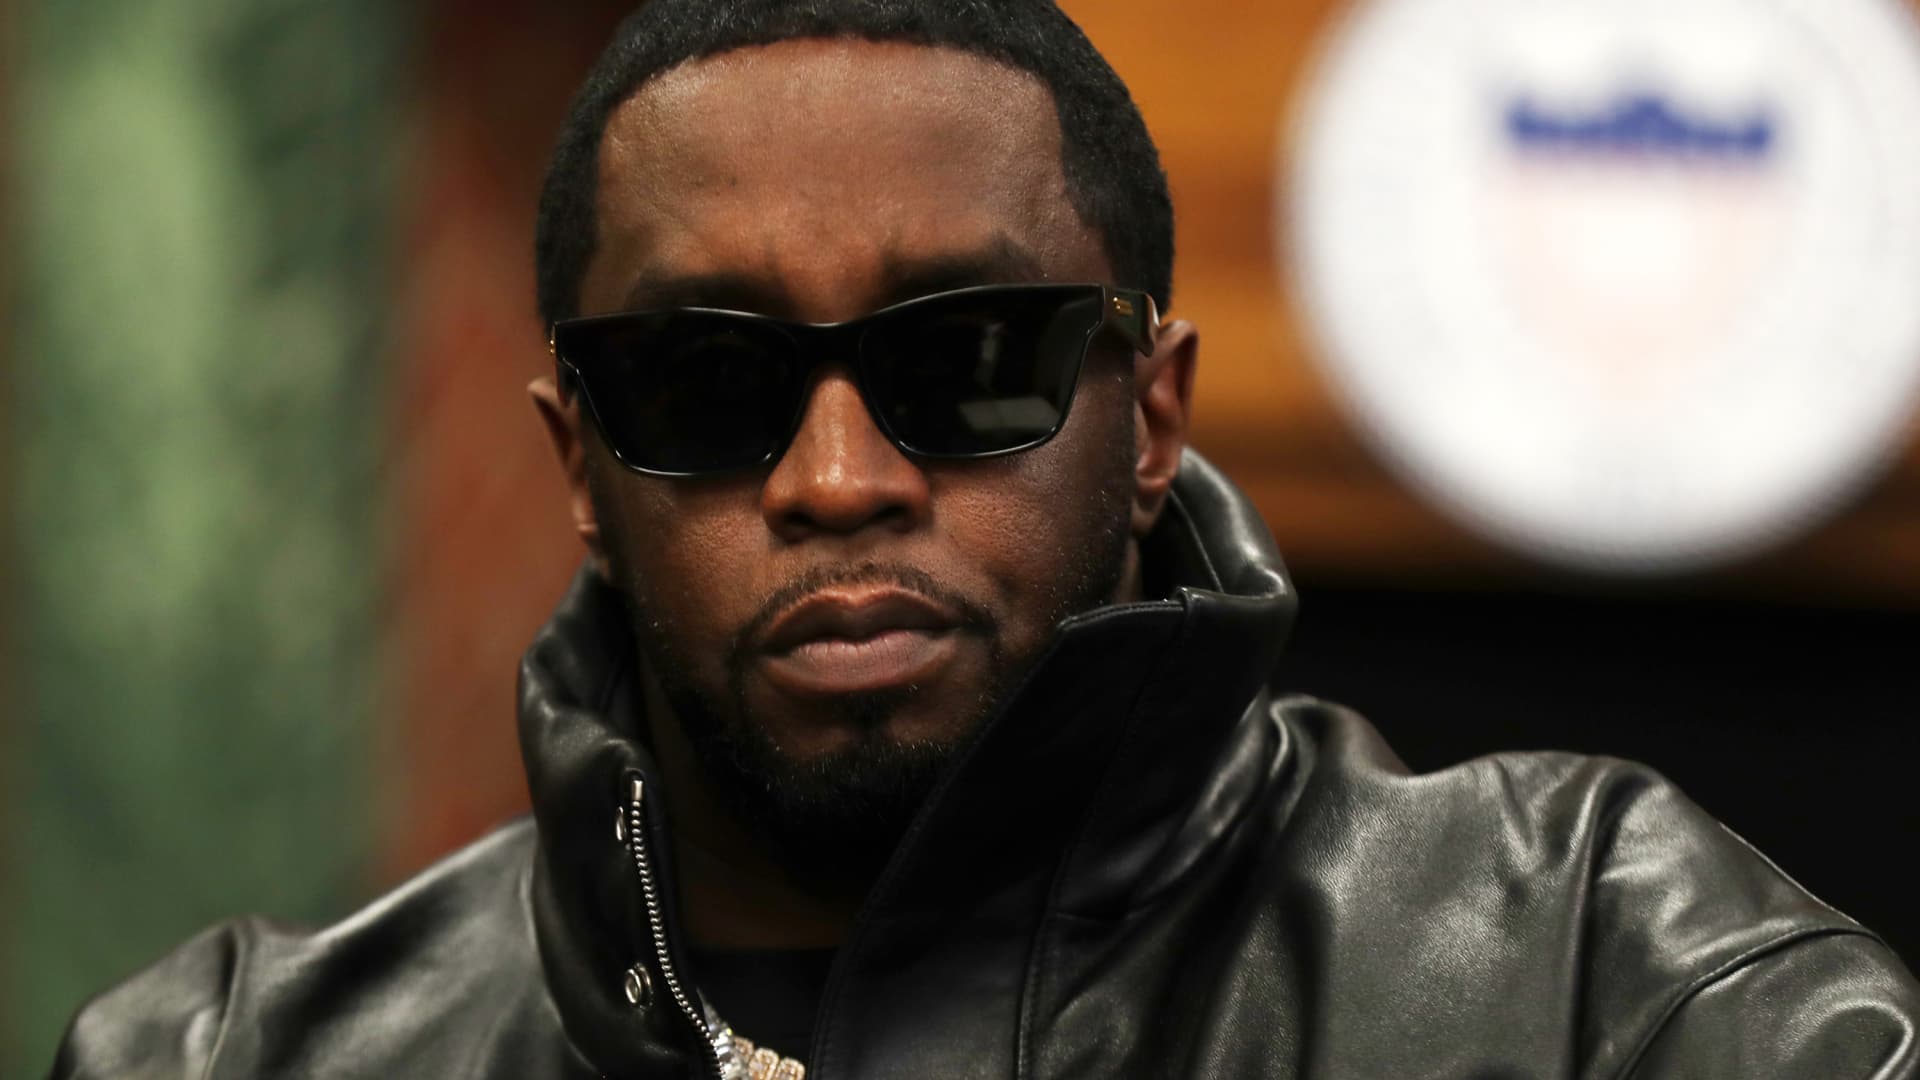 Feds raid Sean Combs properties in LA, Miami on search warrants out of New York: NBC News